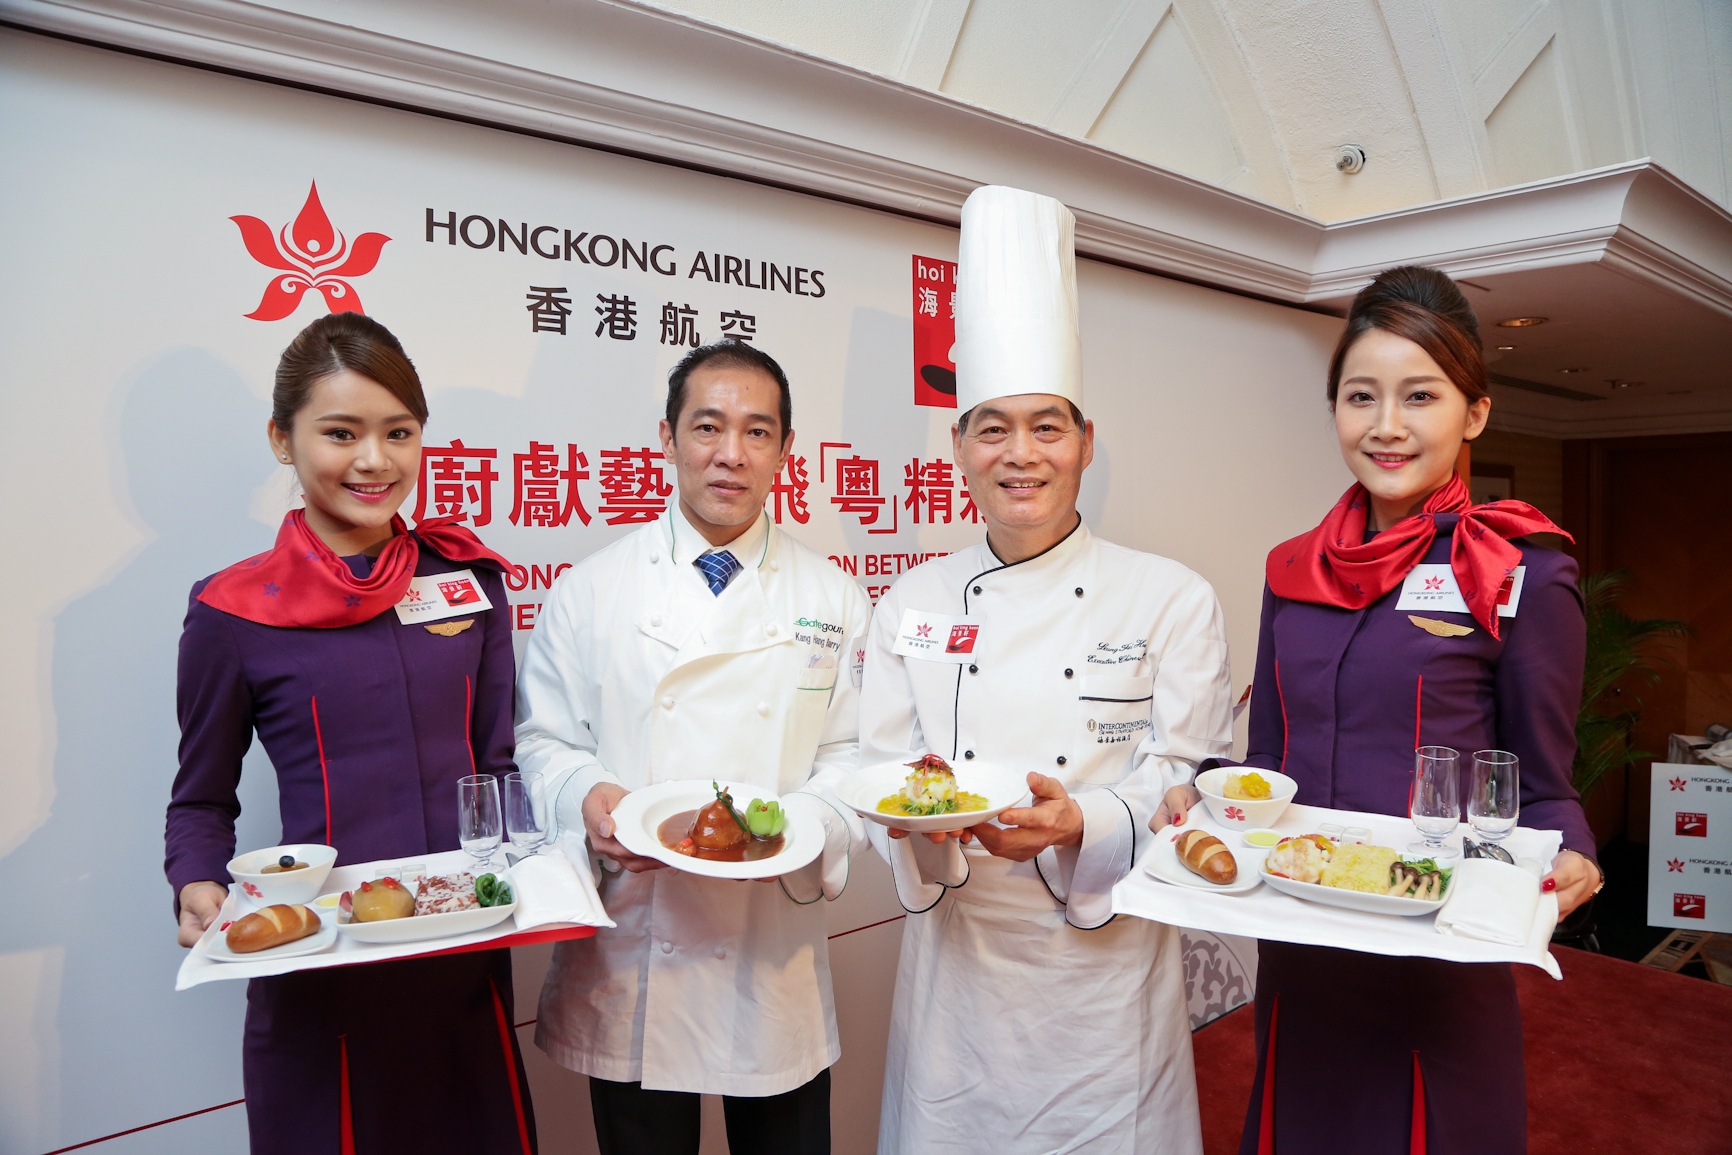 Hong Kong Airlines Hong Kong To Worldwide Air Tickets Online Special Air Fares And Airline Reservation